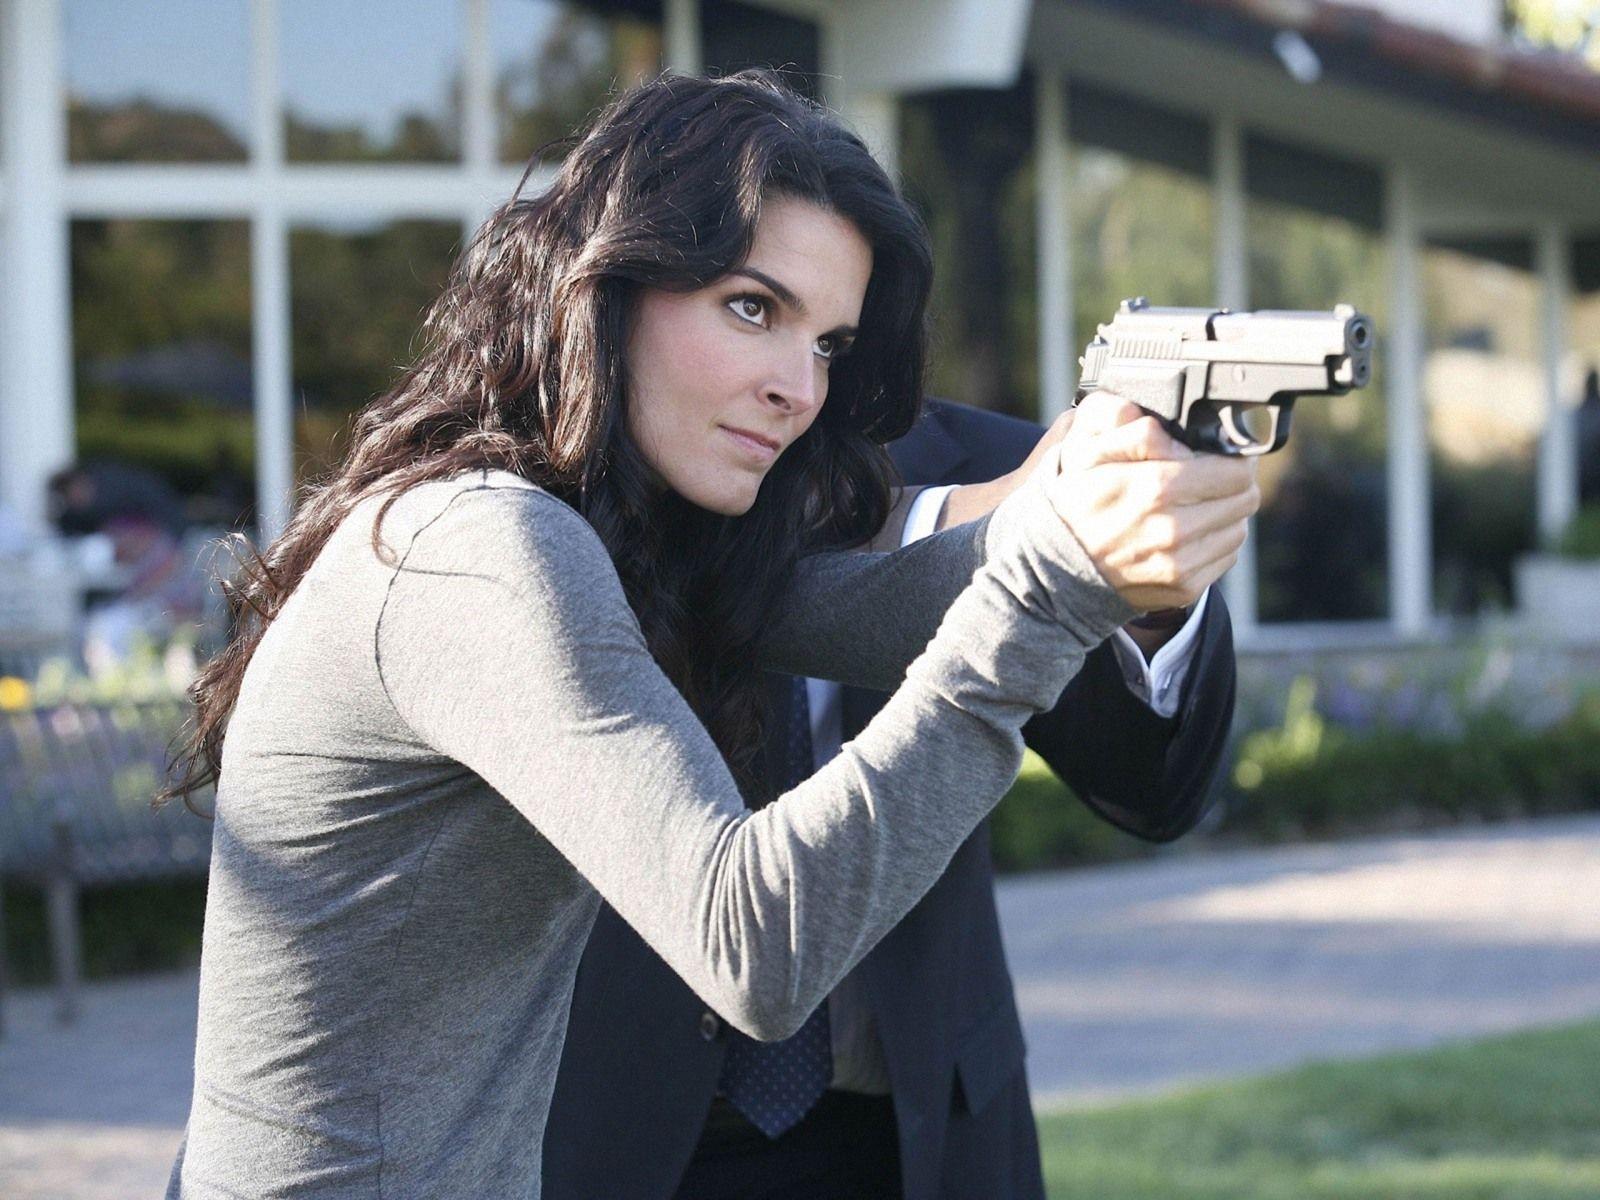 Angie Harmon Image Gallery - Download Angie Harmon latest Hot images, pictu...